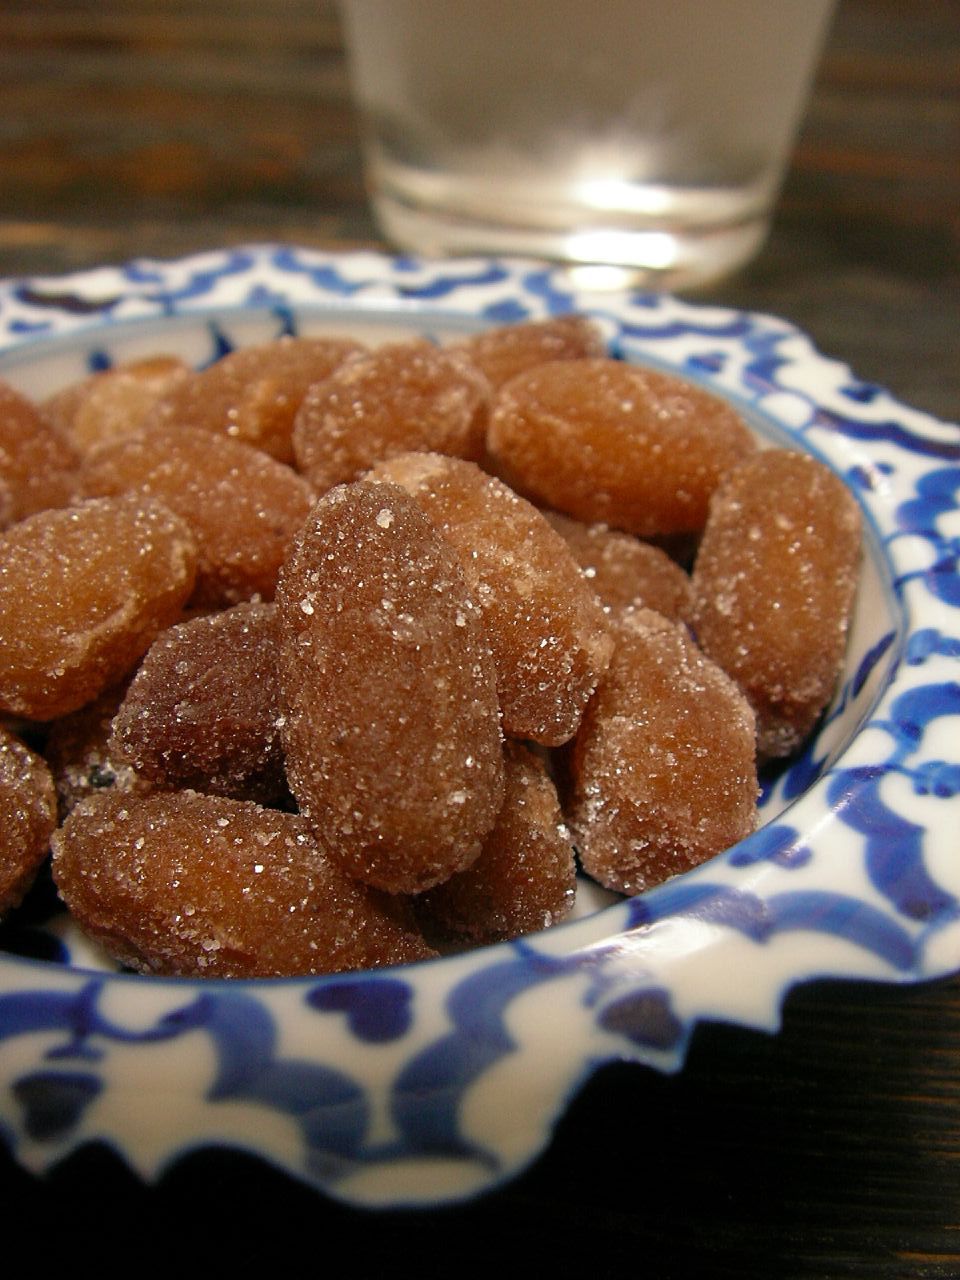 a plate topped with sugar coated donuts